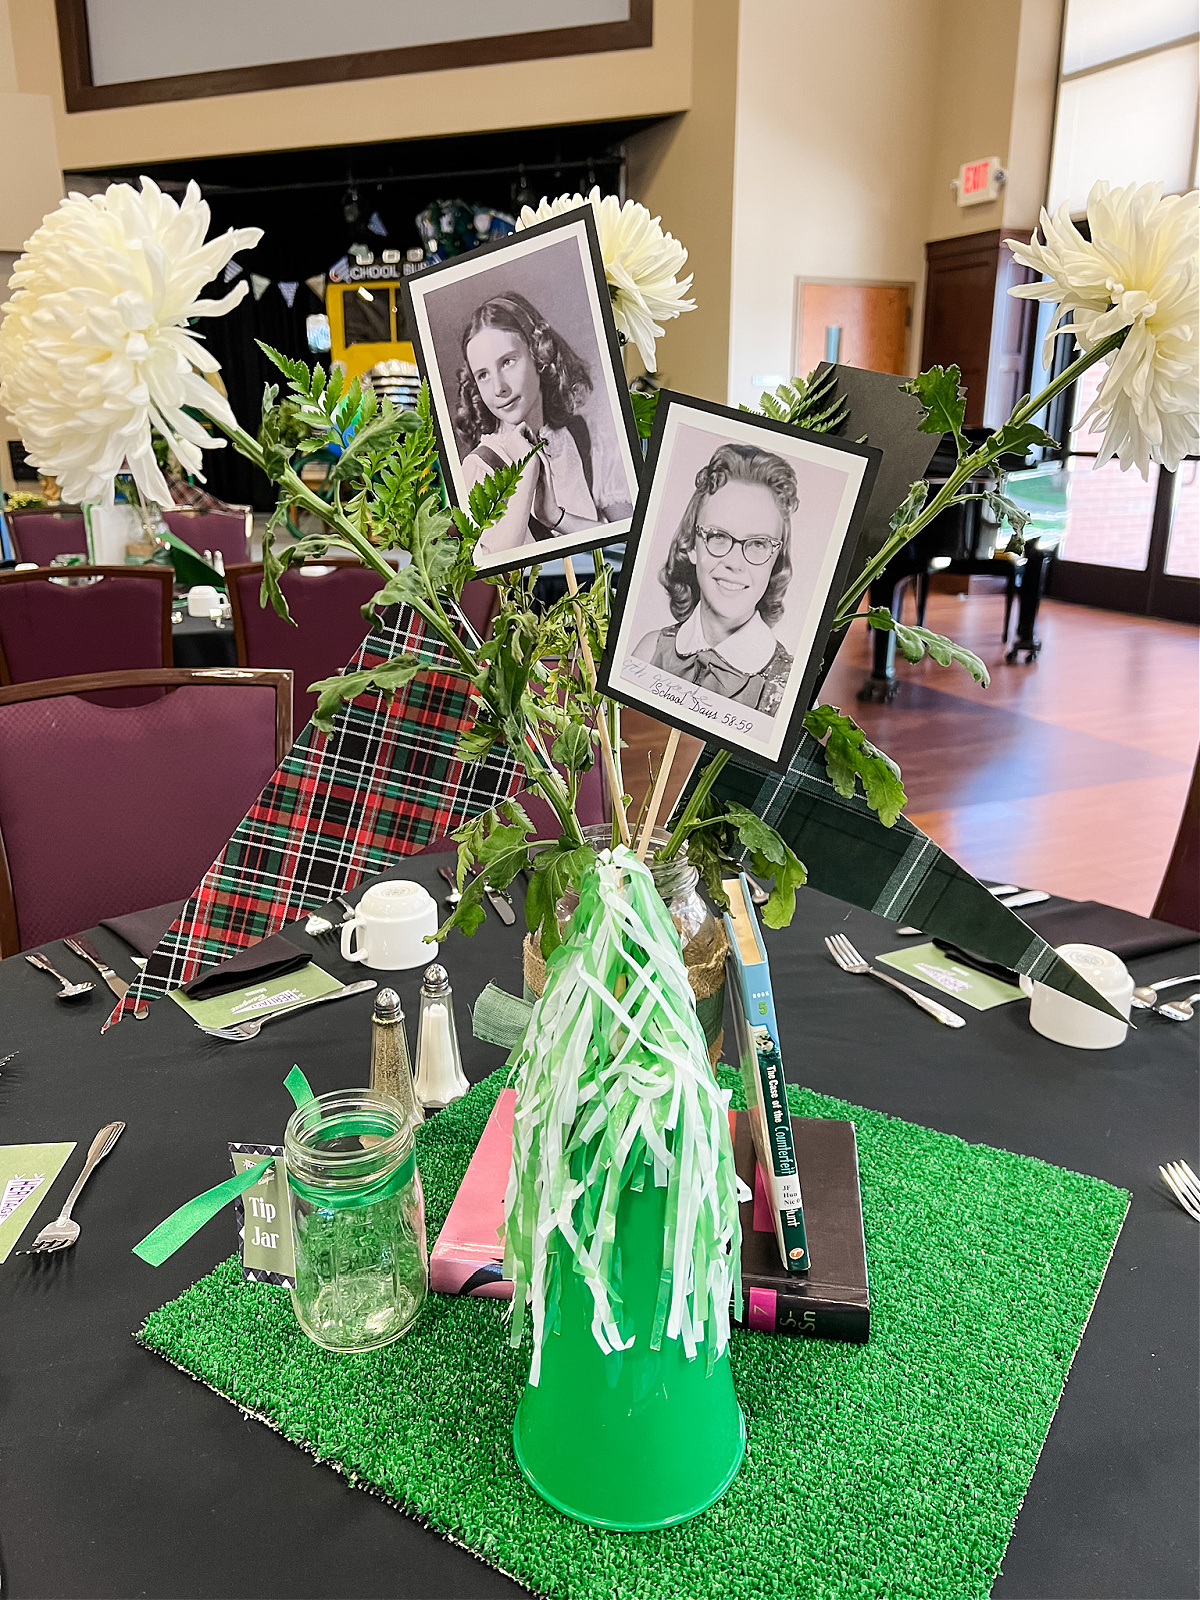 School Days Centerpiece with green turf square base, books, pennants, and vintage school photos in flower vase